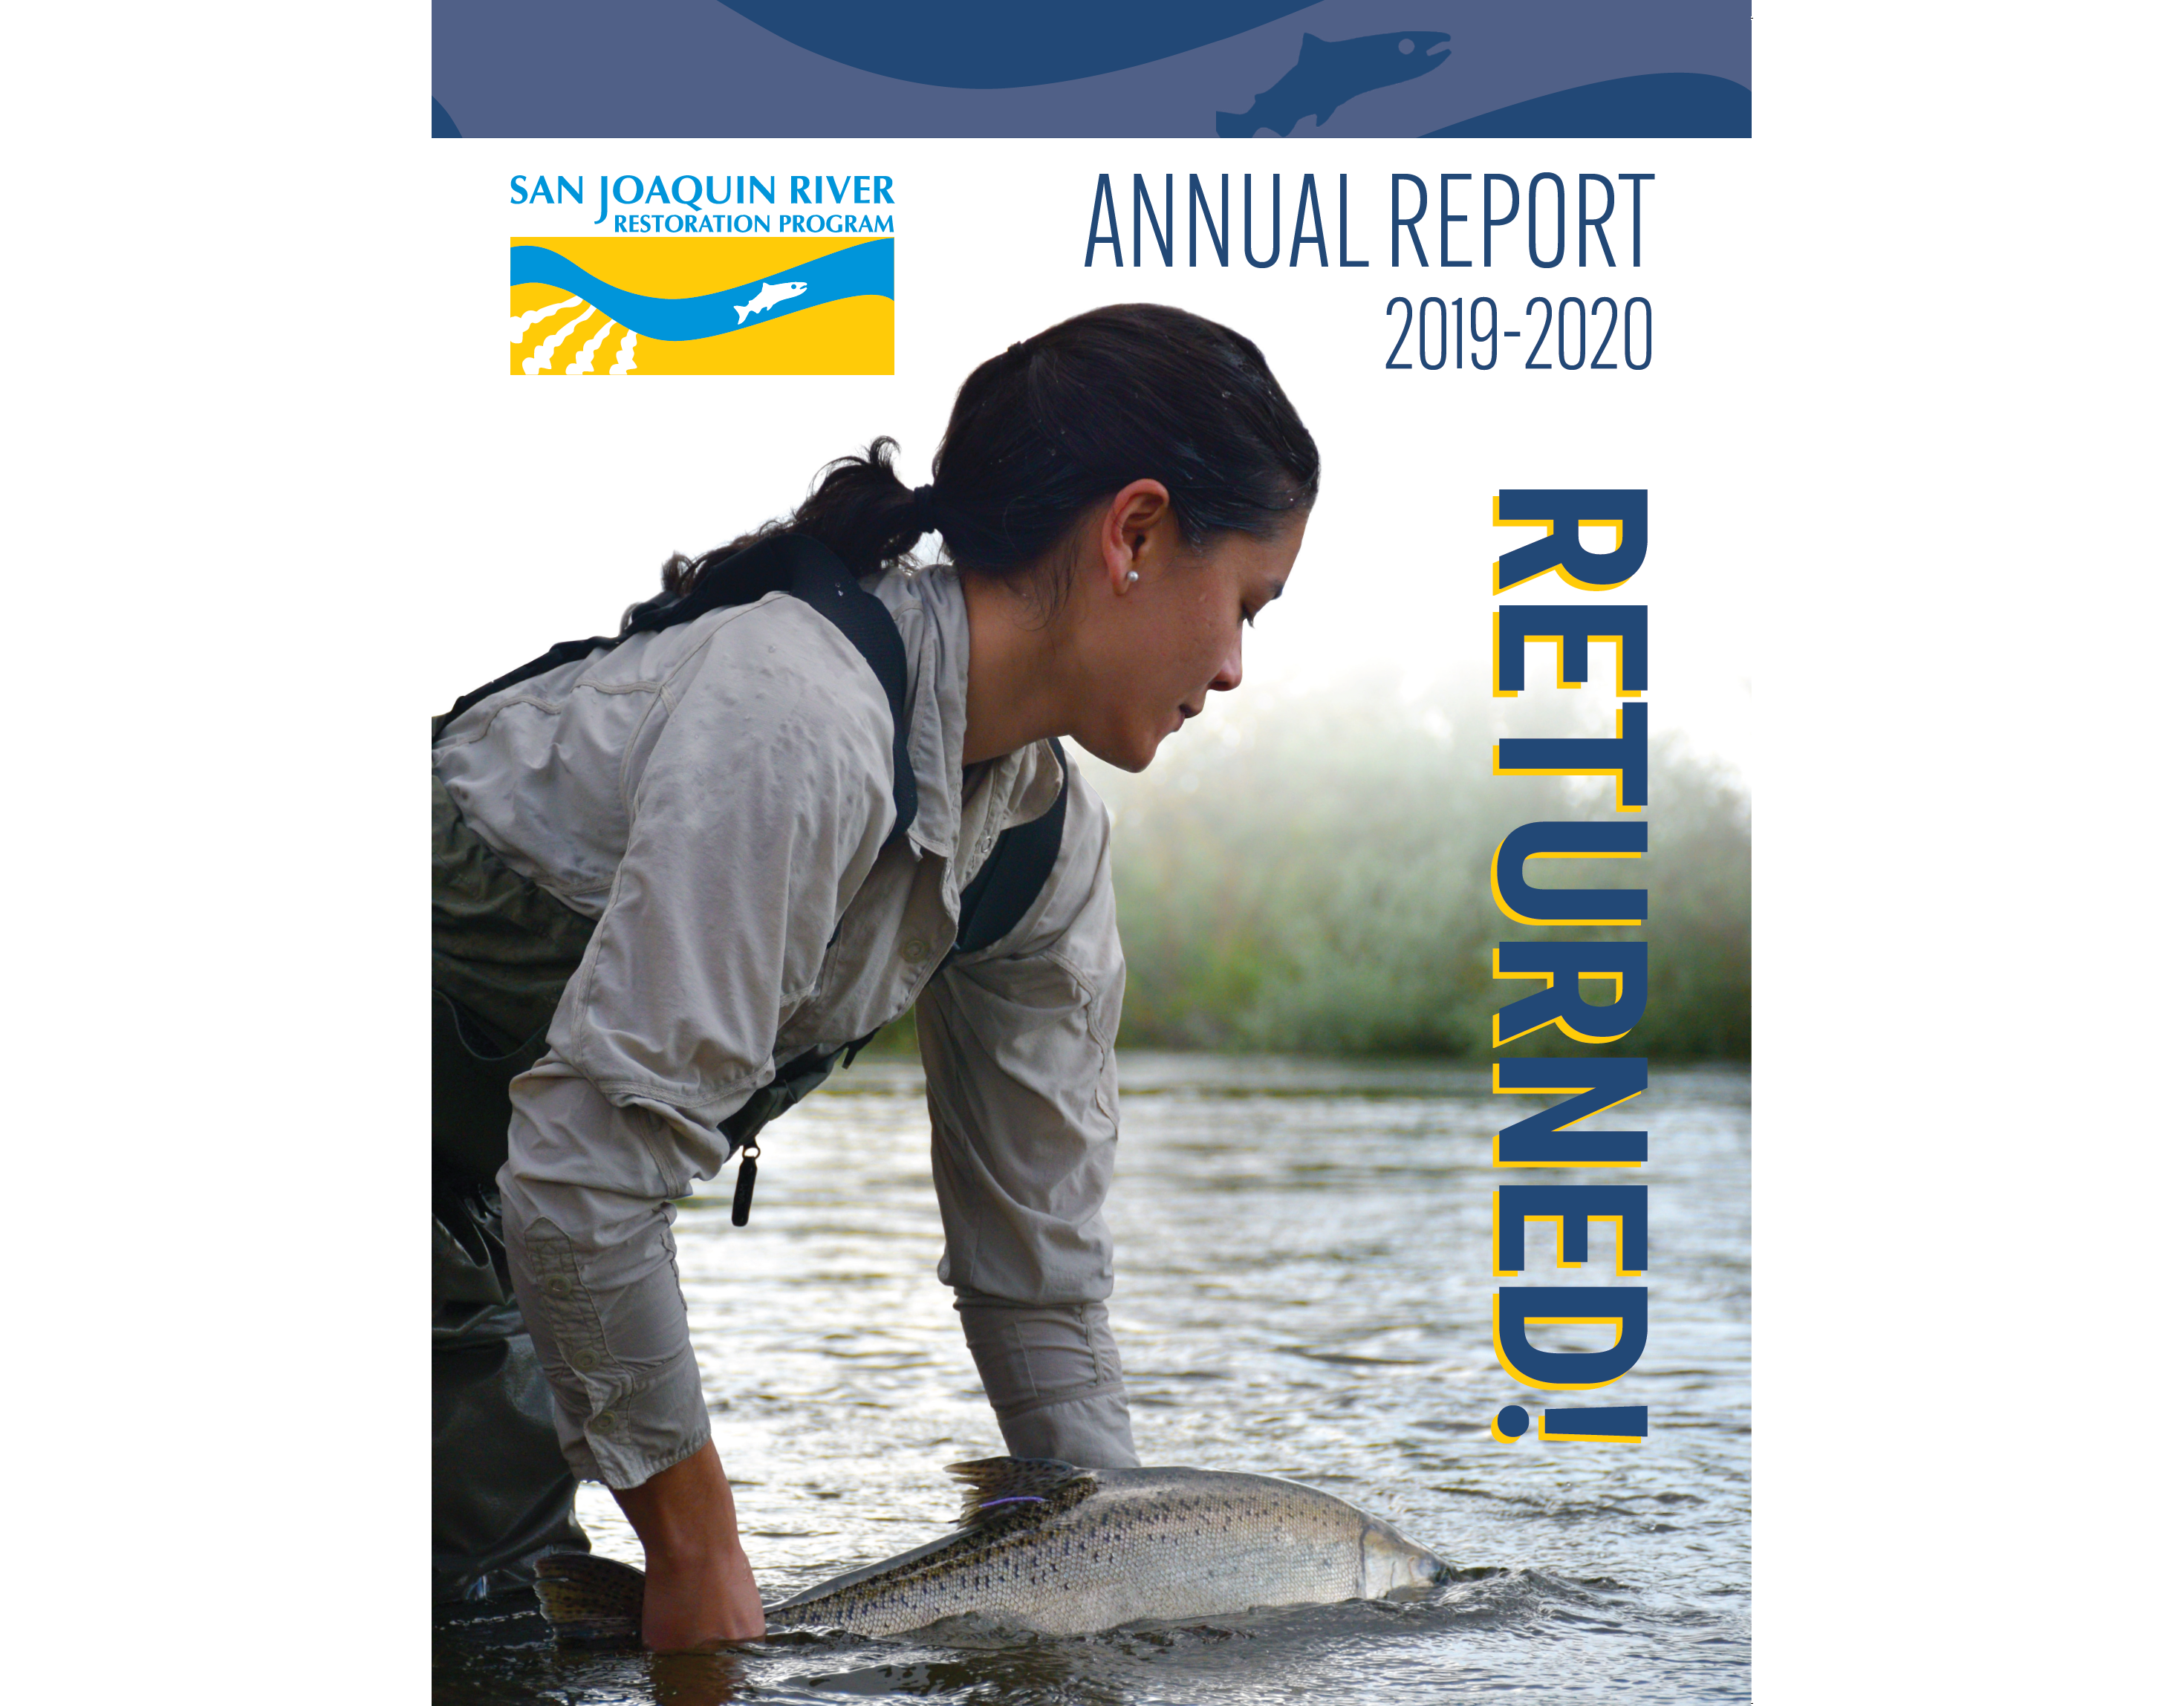 Cover of San Joaquin River Restoration Project 2019 - 2020 annual report showing a woman releasing an adult salmon into the San Joaquin River.